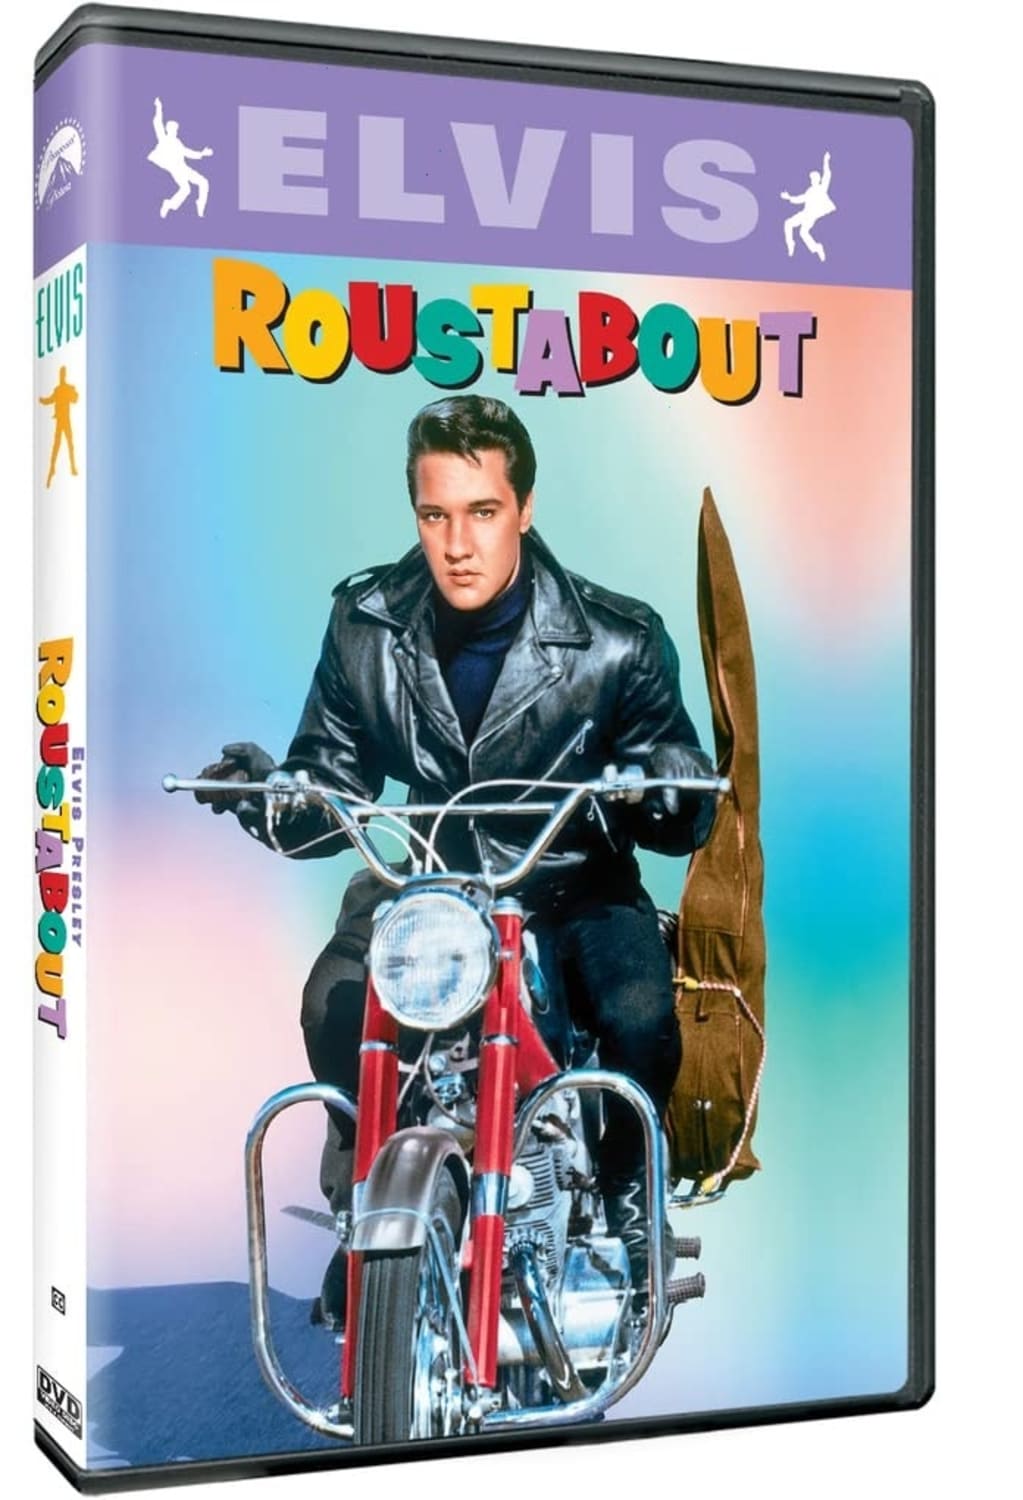 Roustabout (DVD) on MovieShack